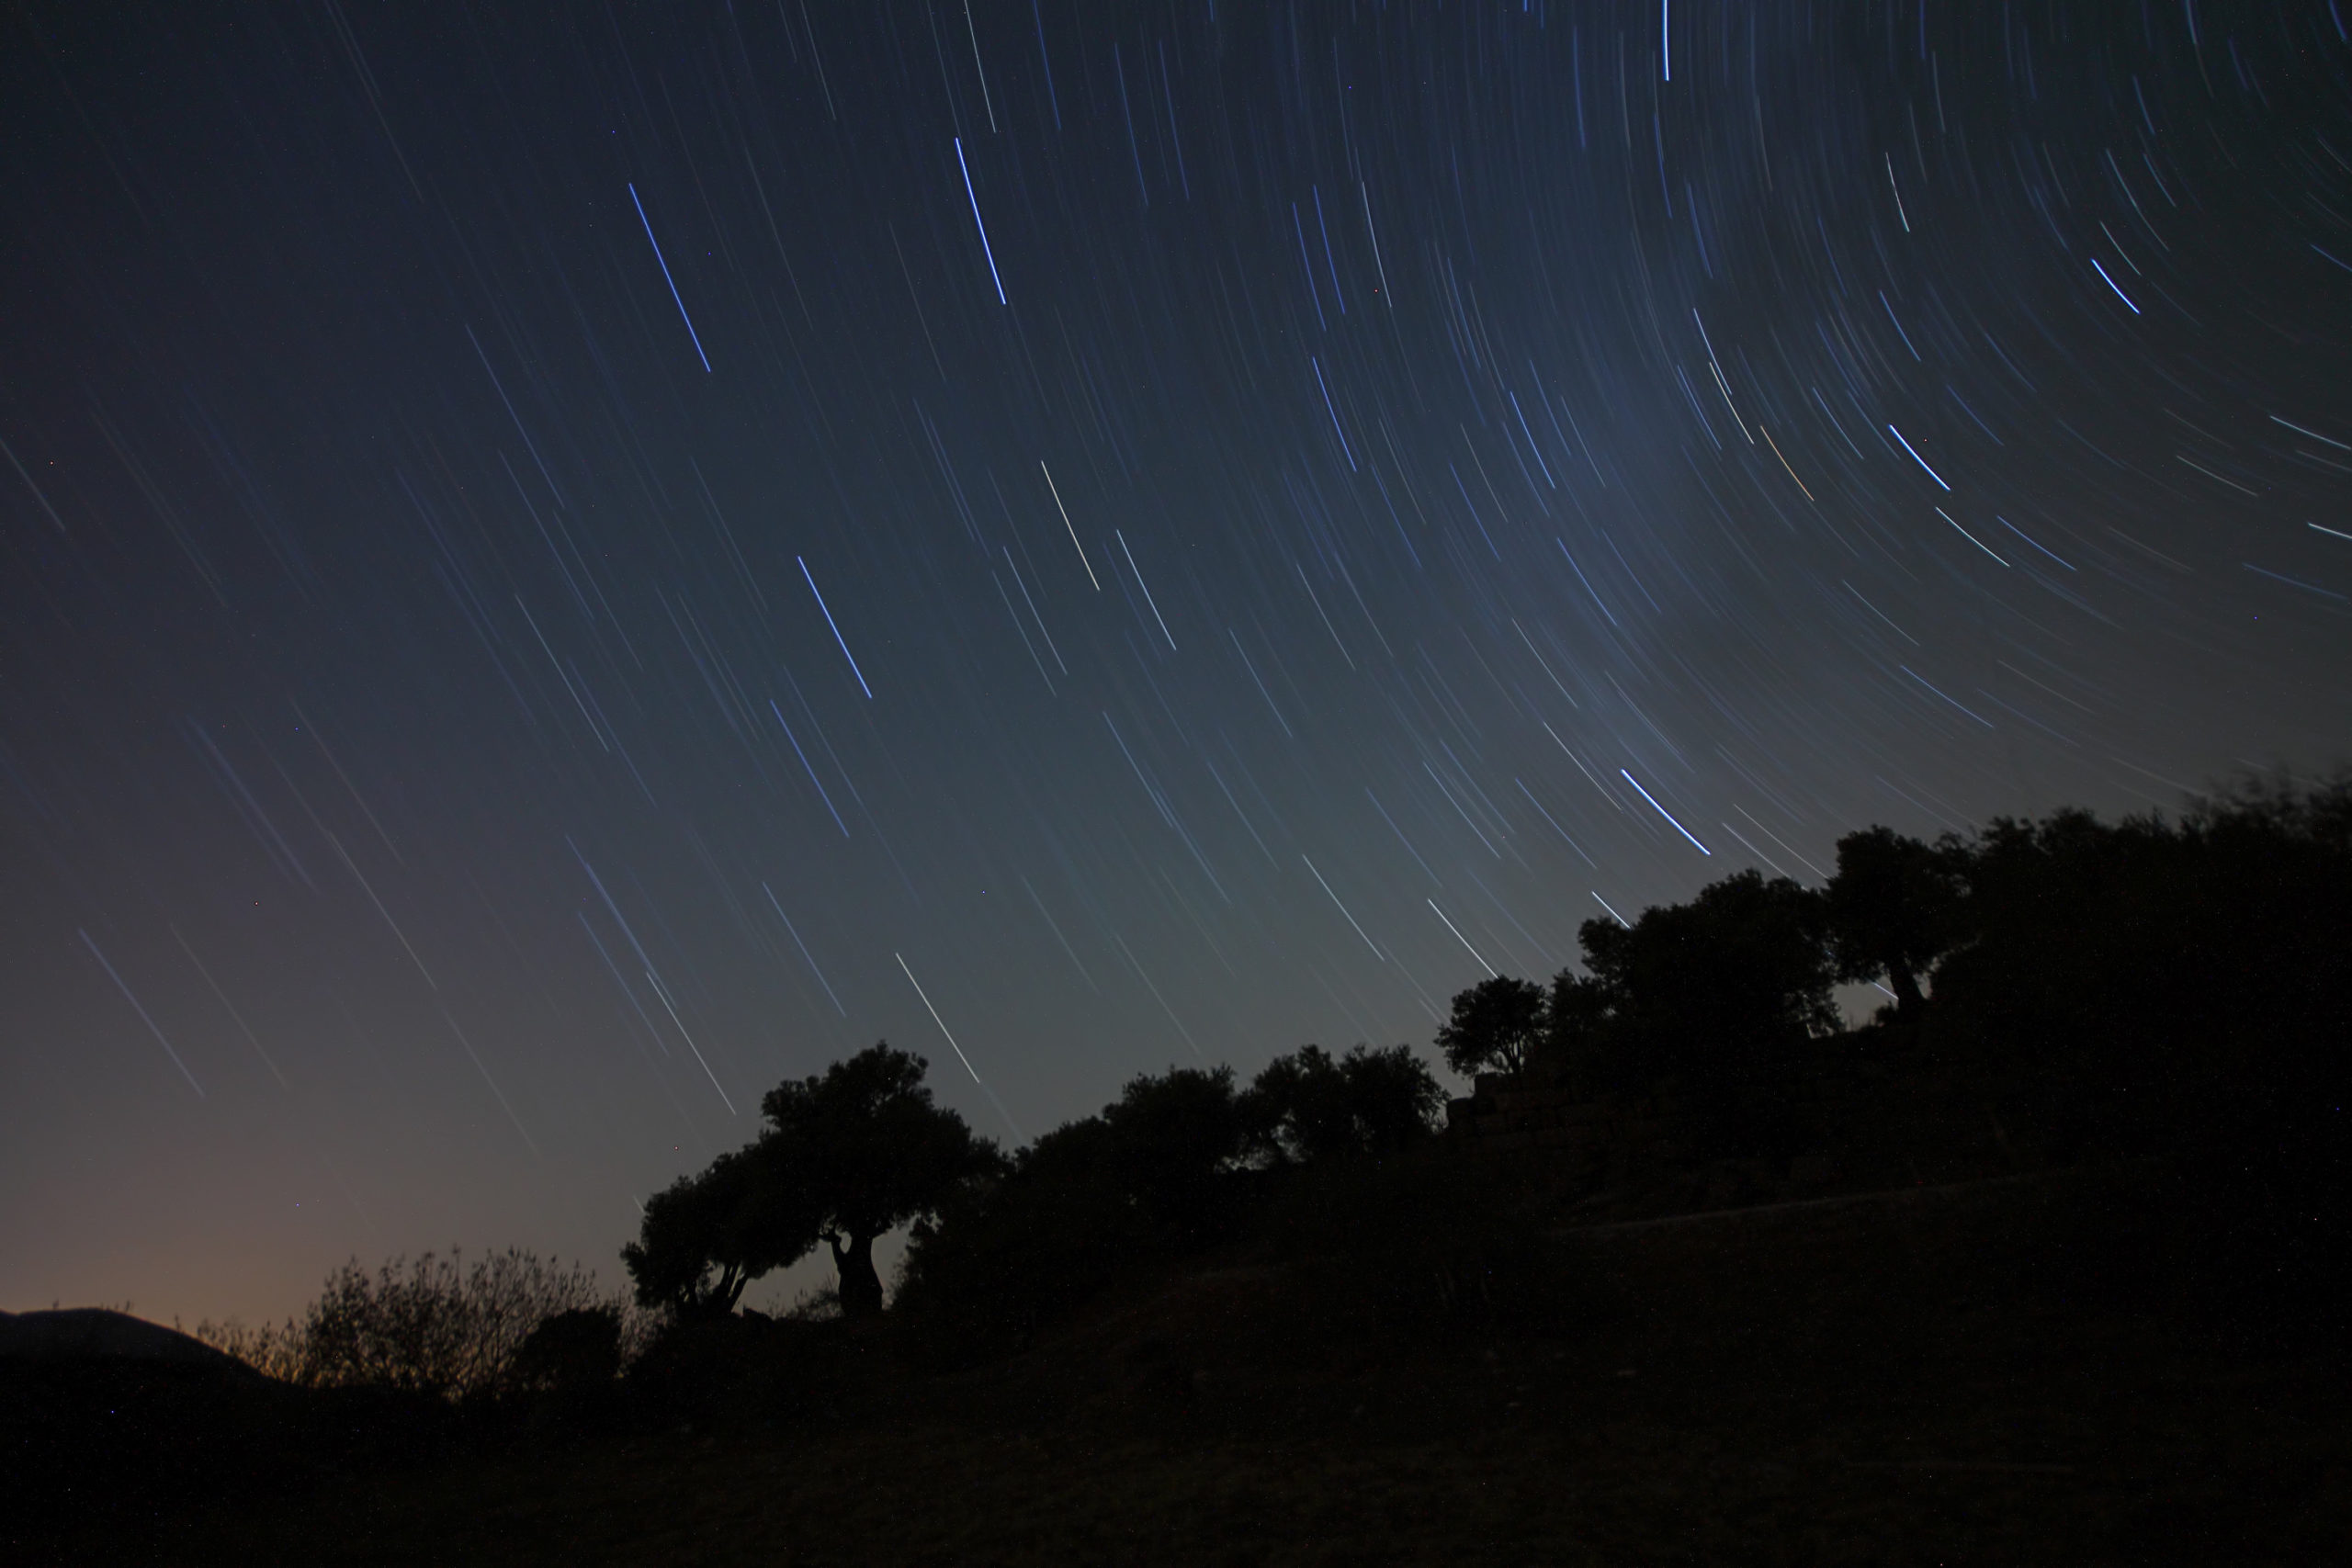 Meteors, conjunctions, occultations, auroras, all to delight stargazers this summer